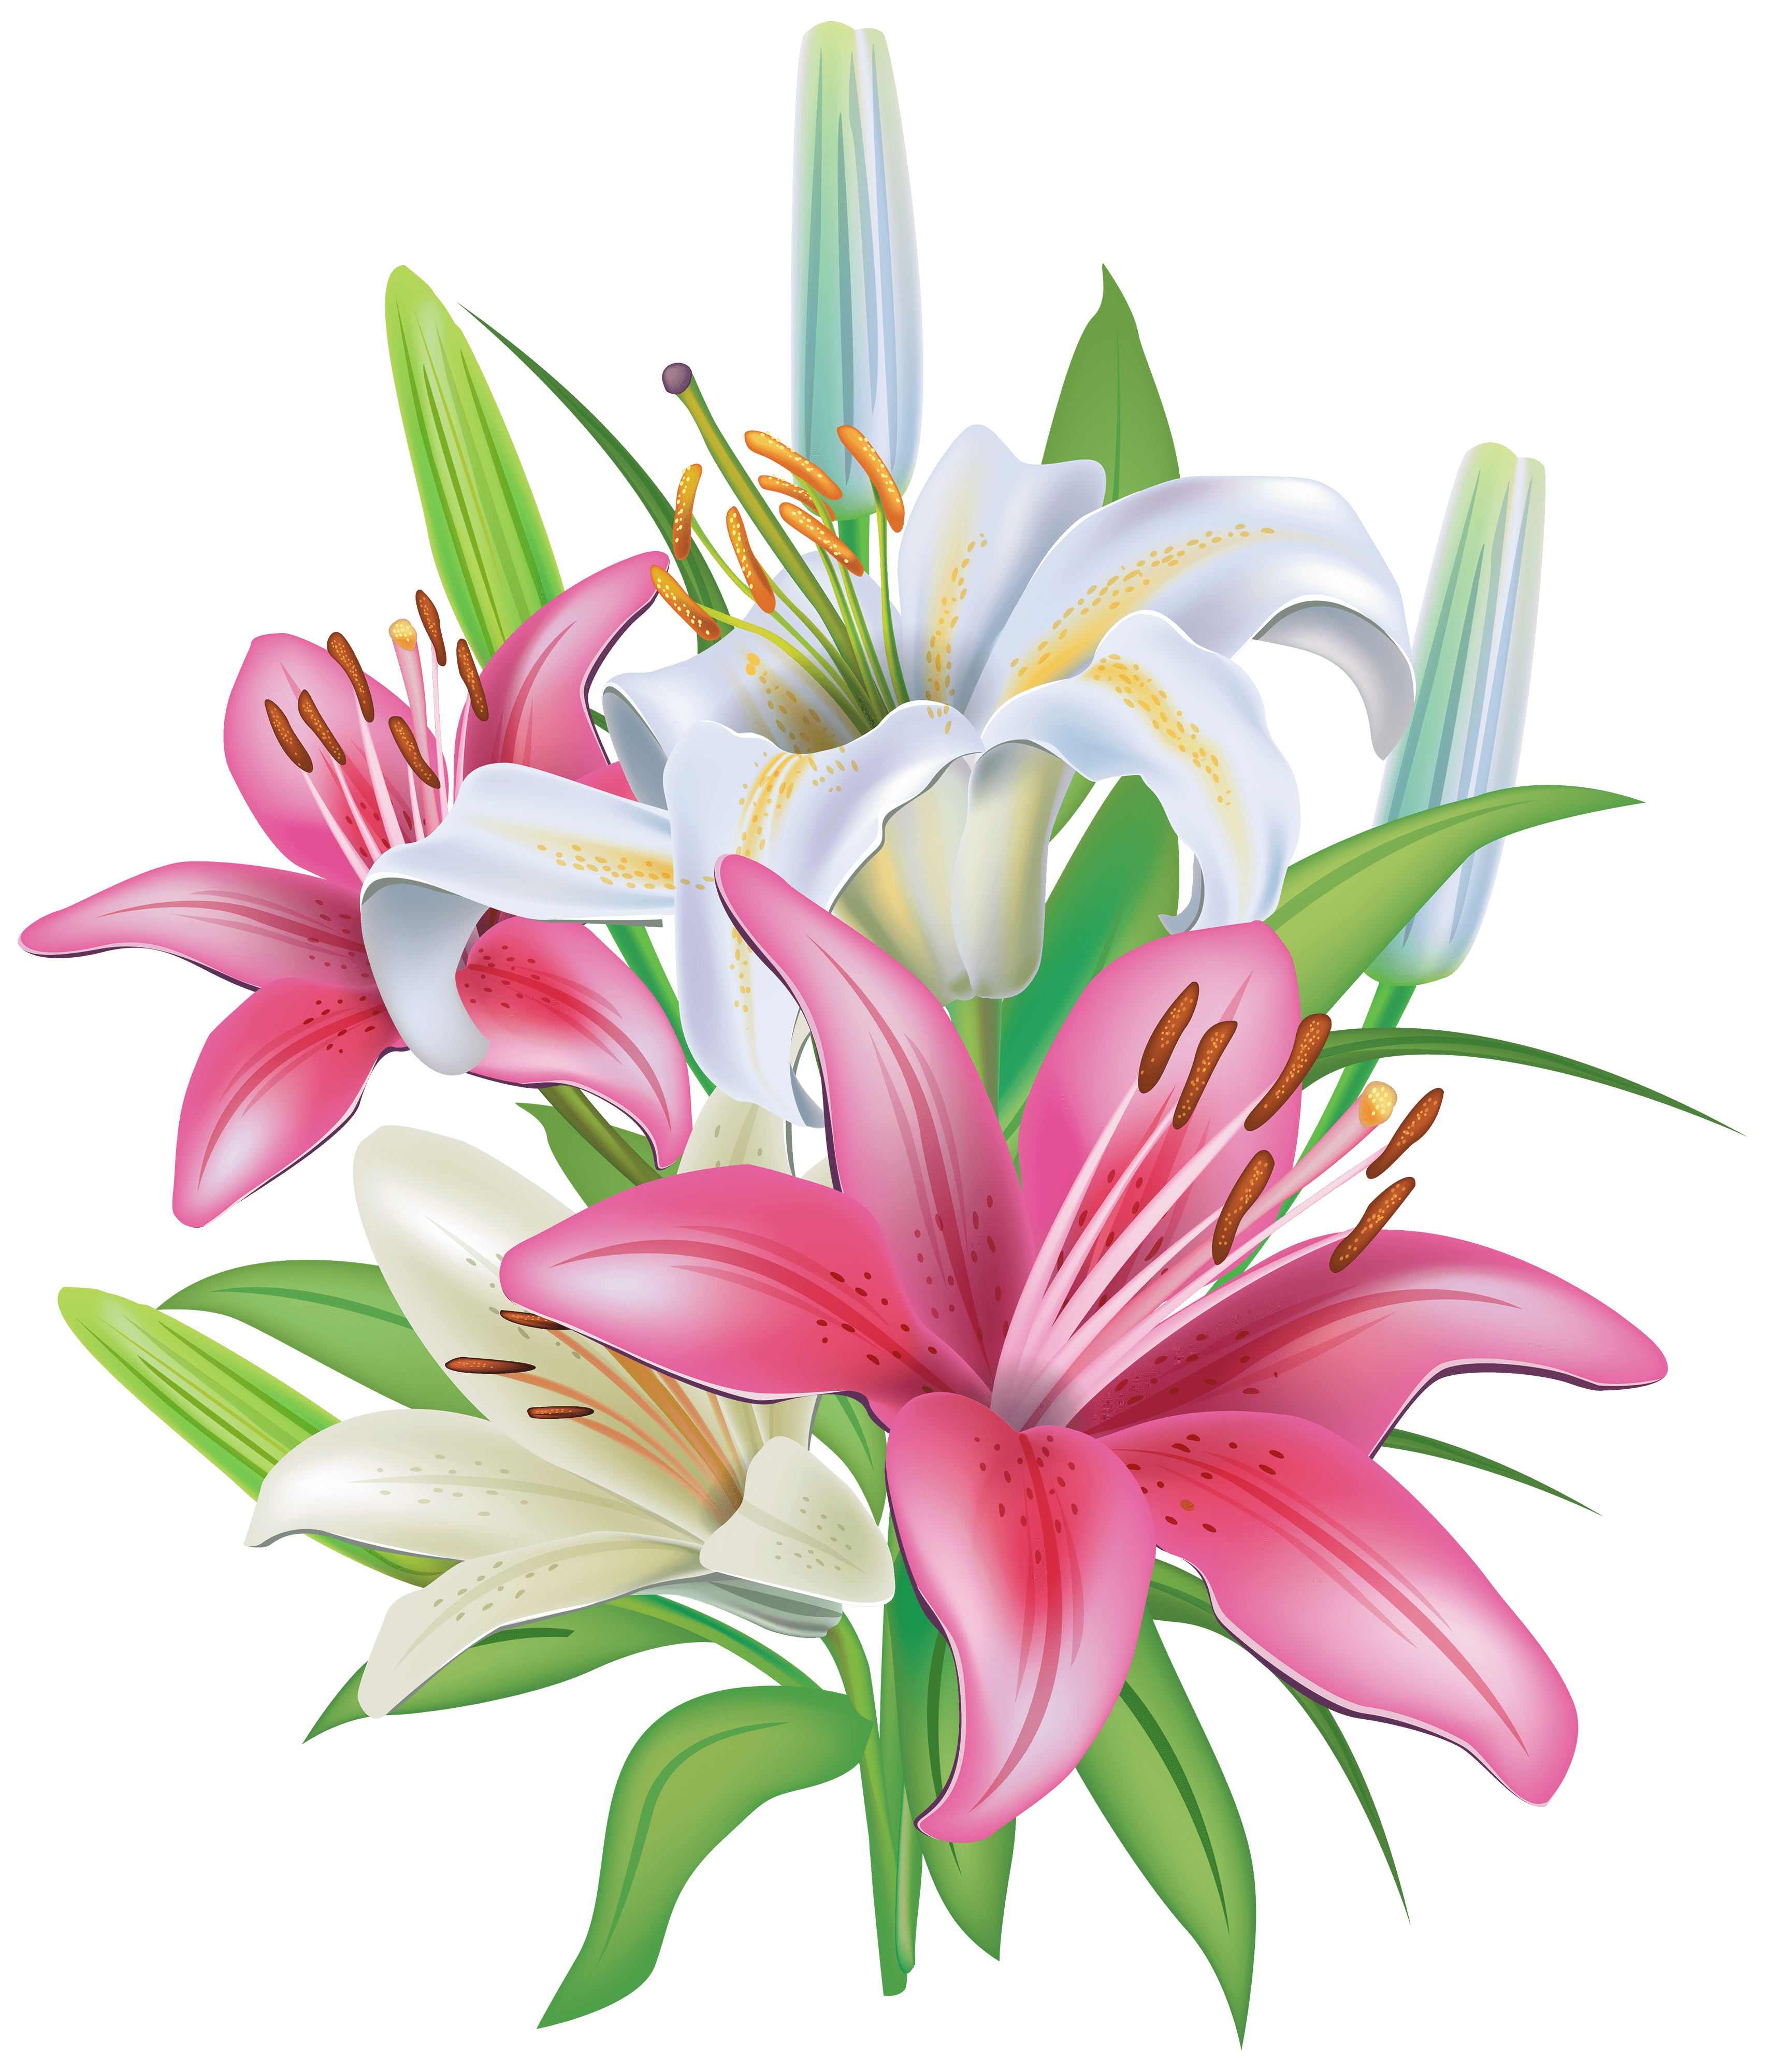 White Lily Flower Png Clipart Image Best Web Clipart - vrogue.co